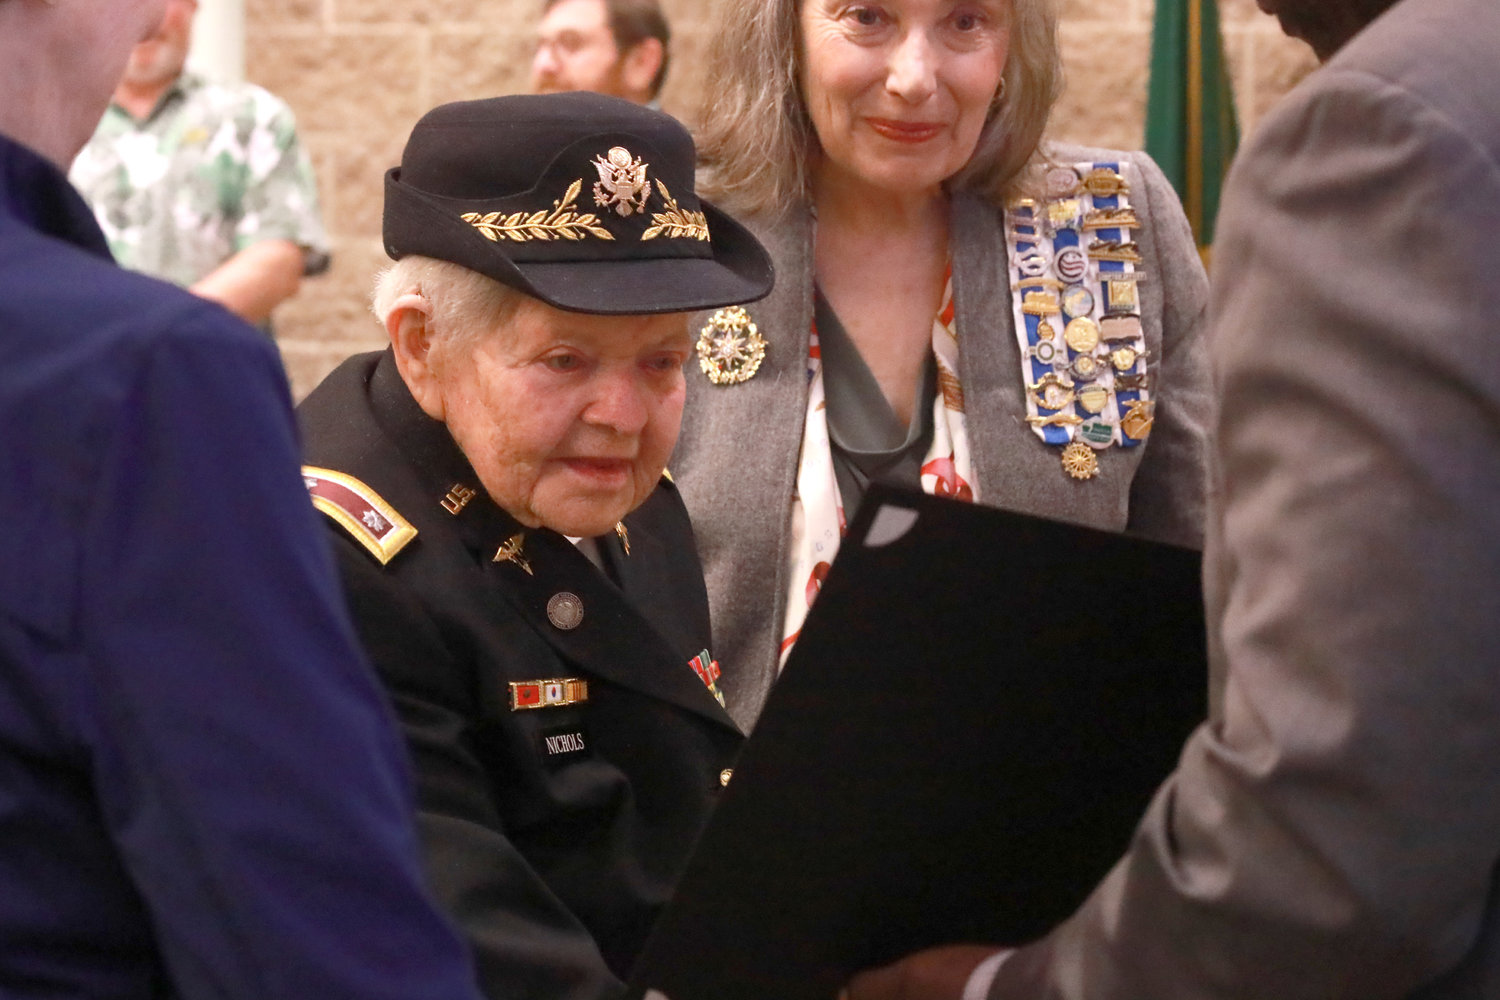 Lieutenant Colonel Barbara Nichols accepted the City of Lacey Proclamation honoring her service and life at the city council meeting August 4, 2022.